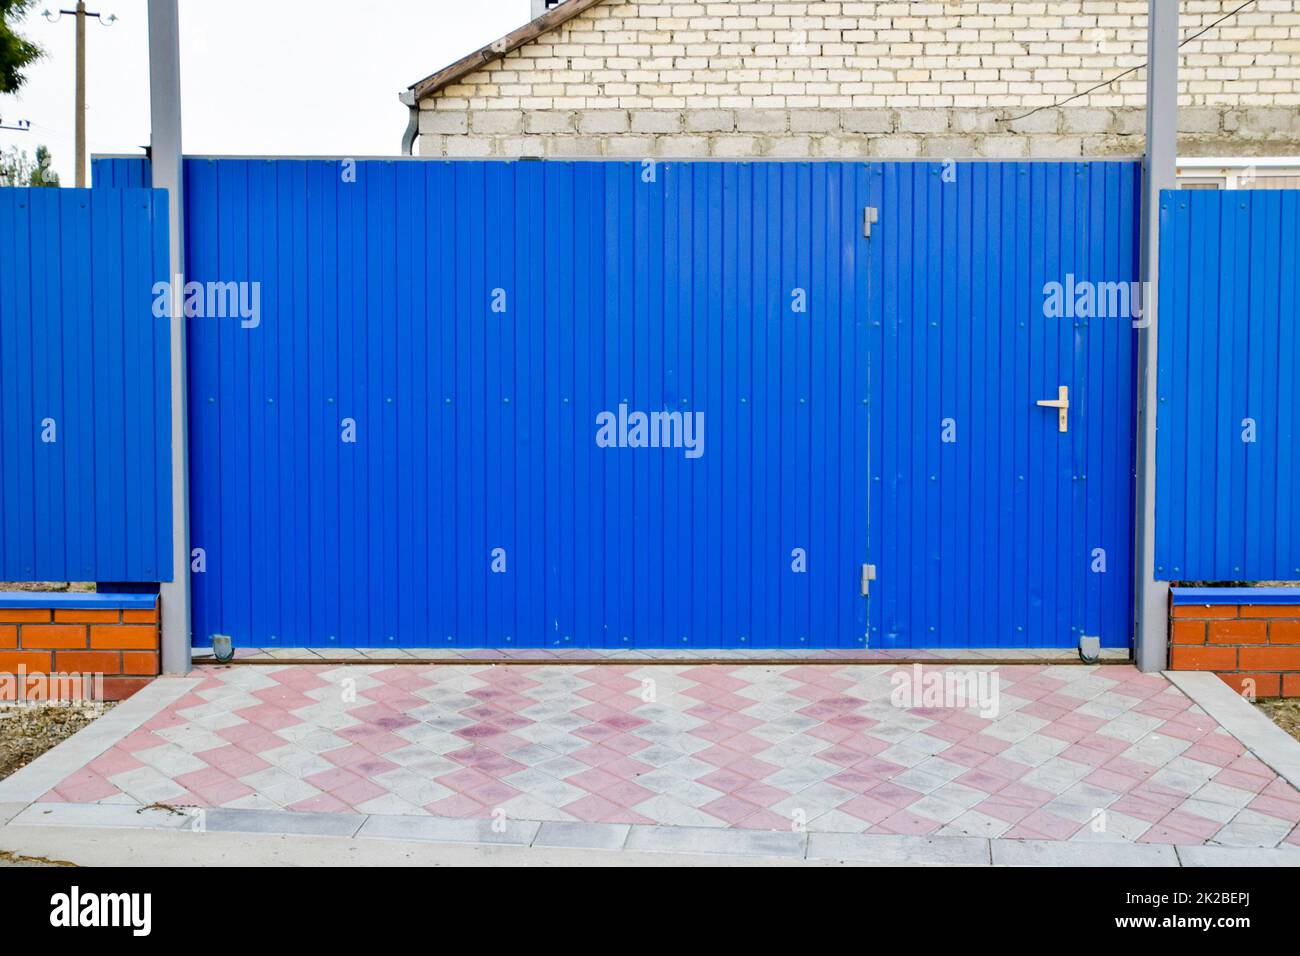 Fence and gate from sheets of blue corrugated metal. Stock Photo